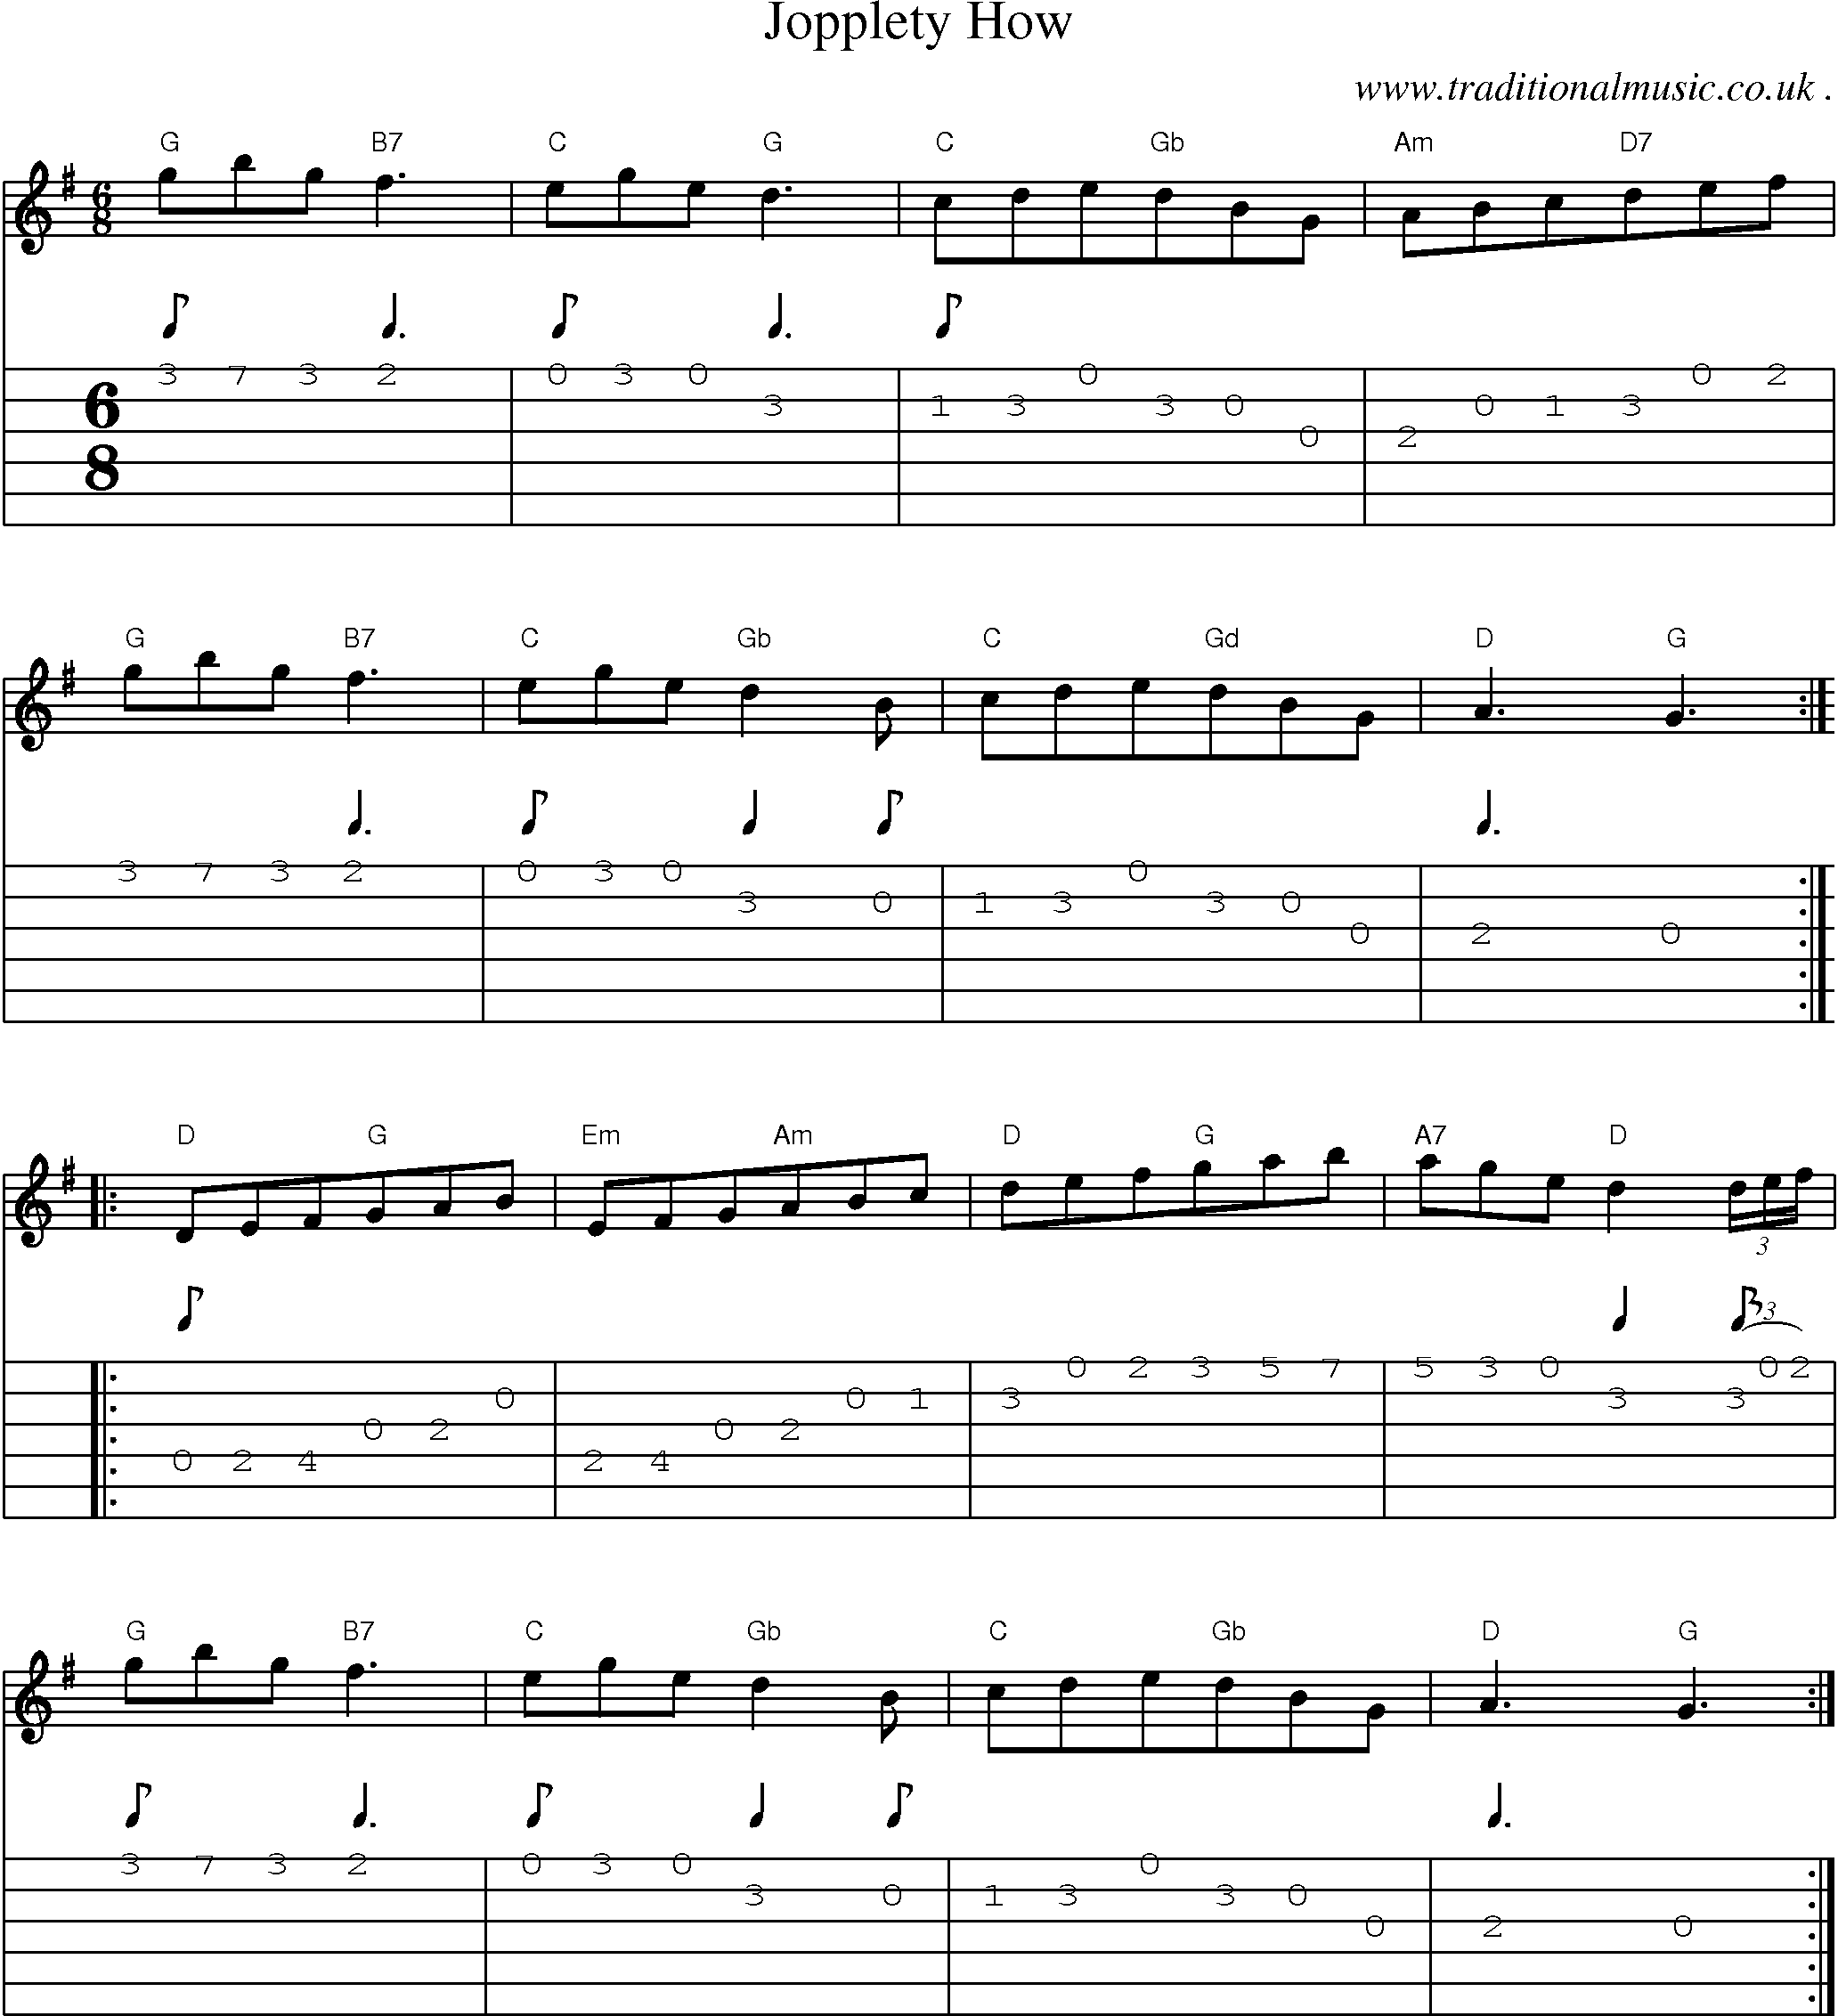 Sheet-Music and Guitar Tabs for Jopplety How